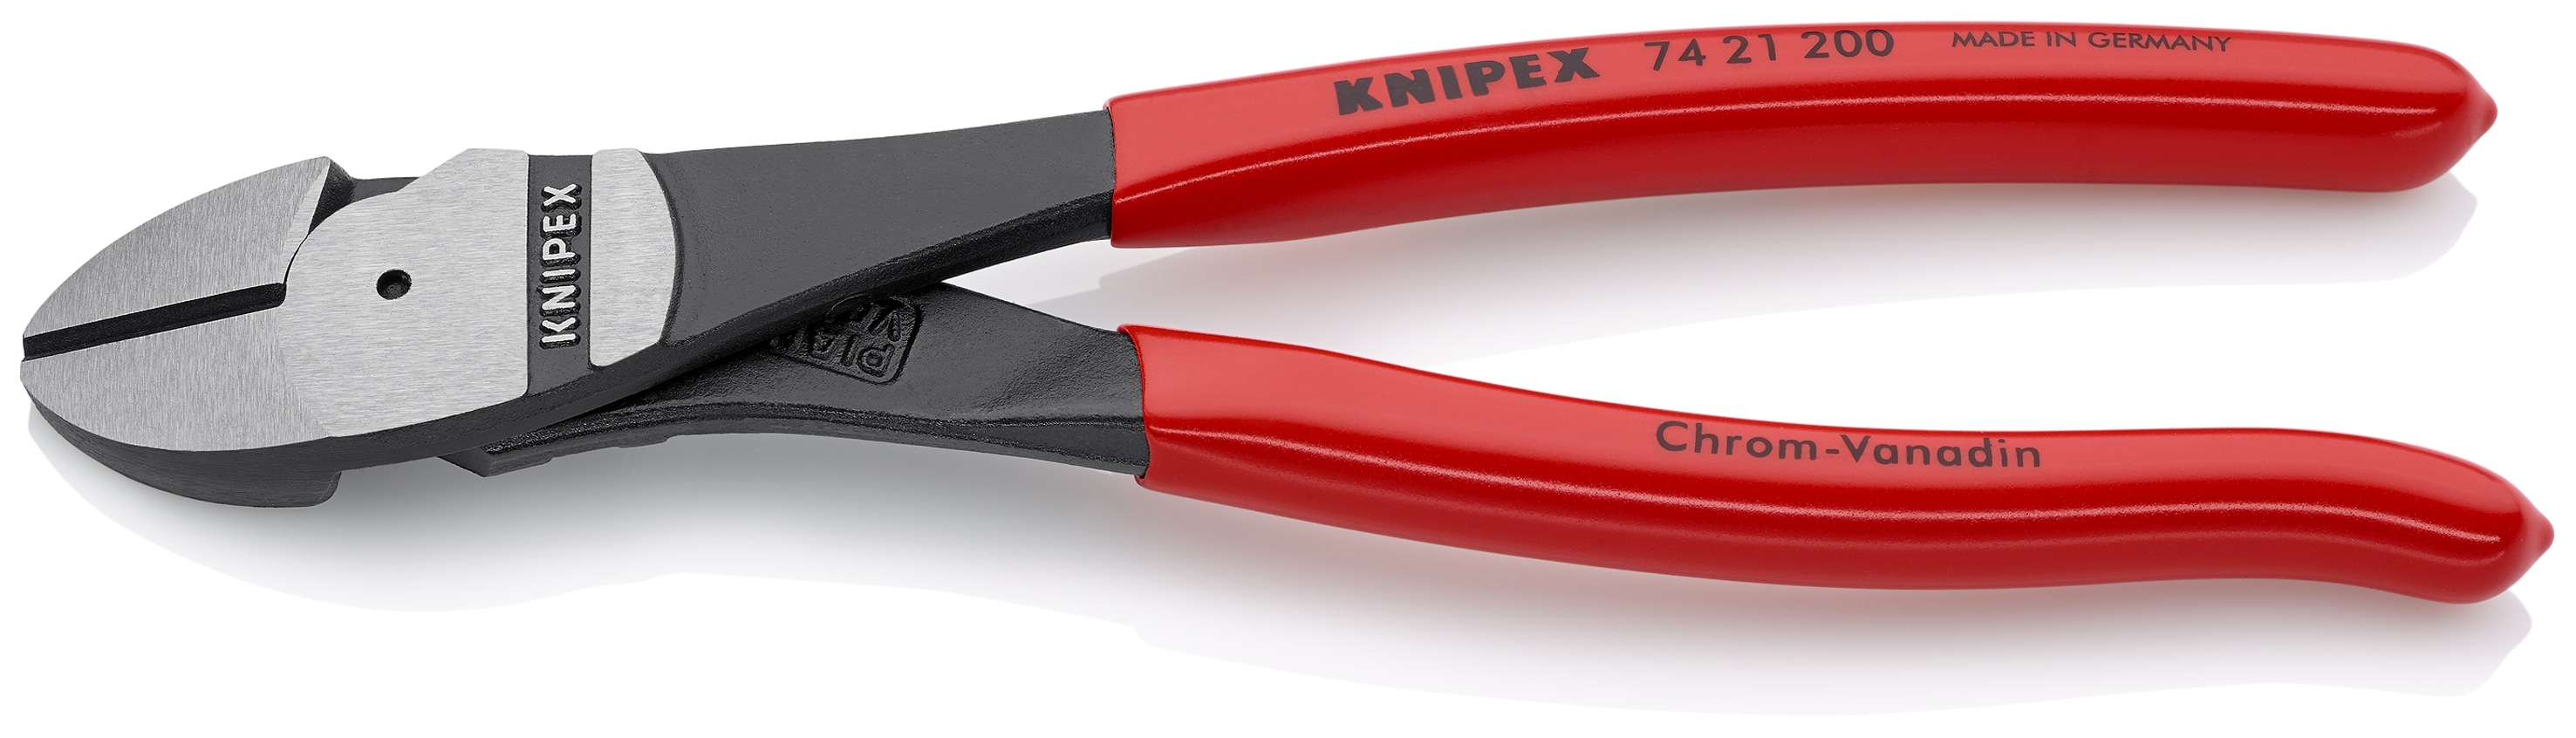 Knipex Angled Electricians Shears Scissors 160mm Multi Component Grips